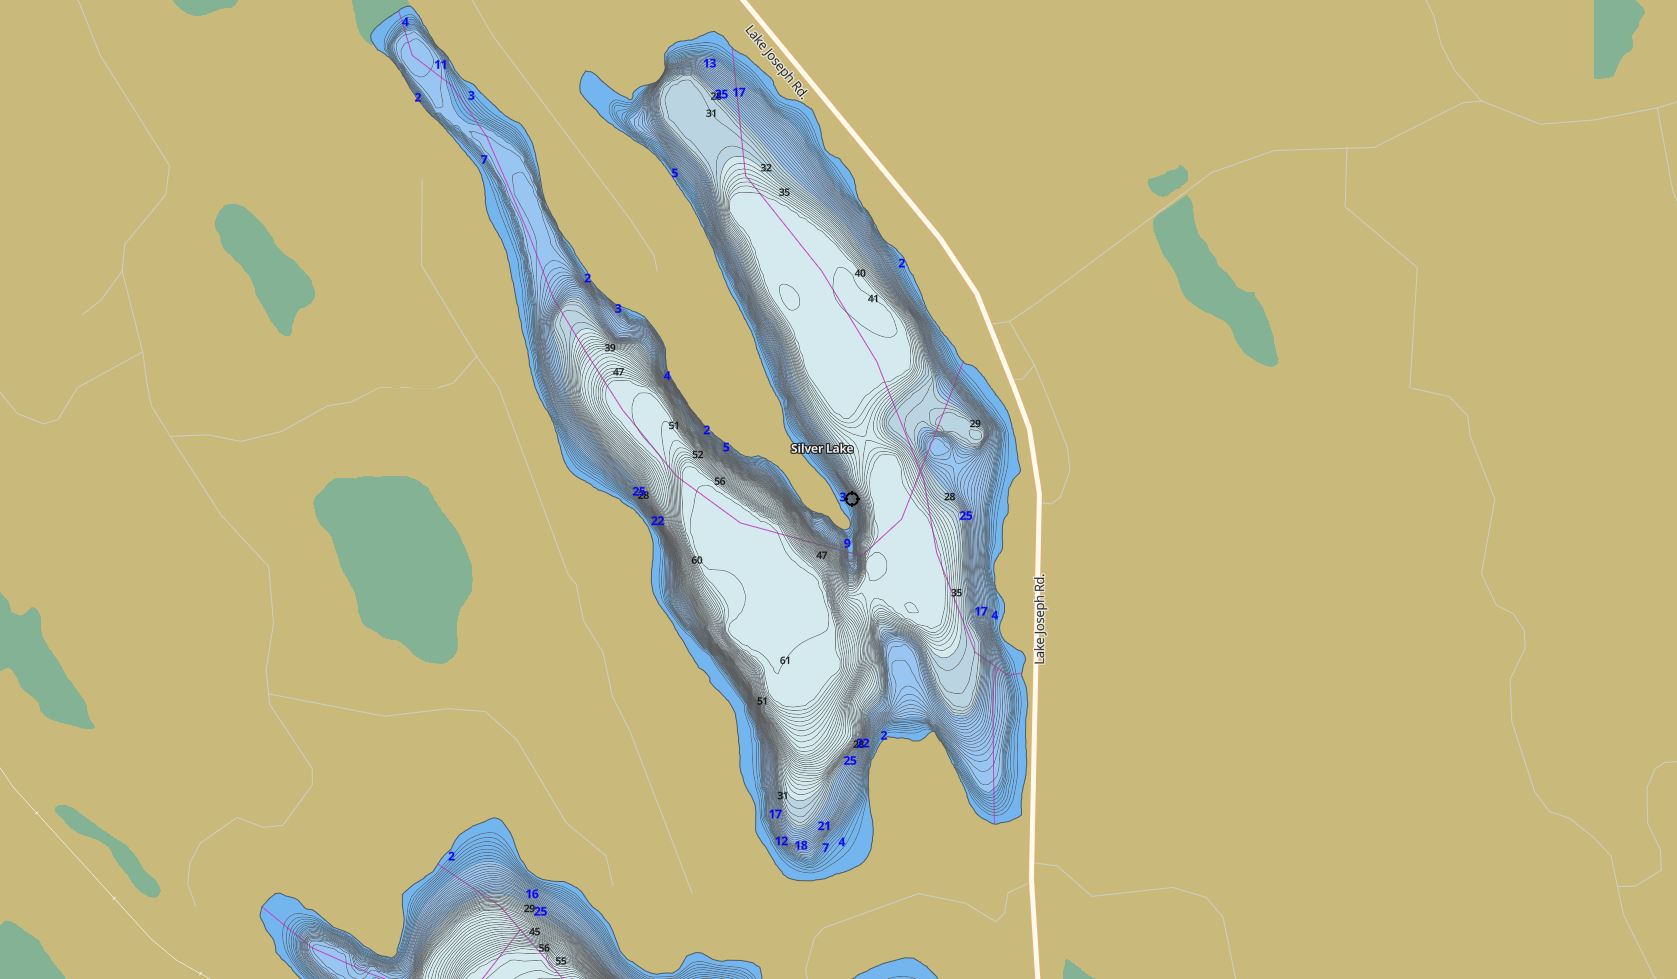 Contour Map of Silver Lake in Municipality of Seguin and the District of Parry Sound